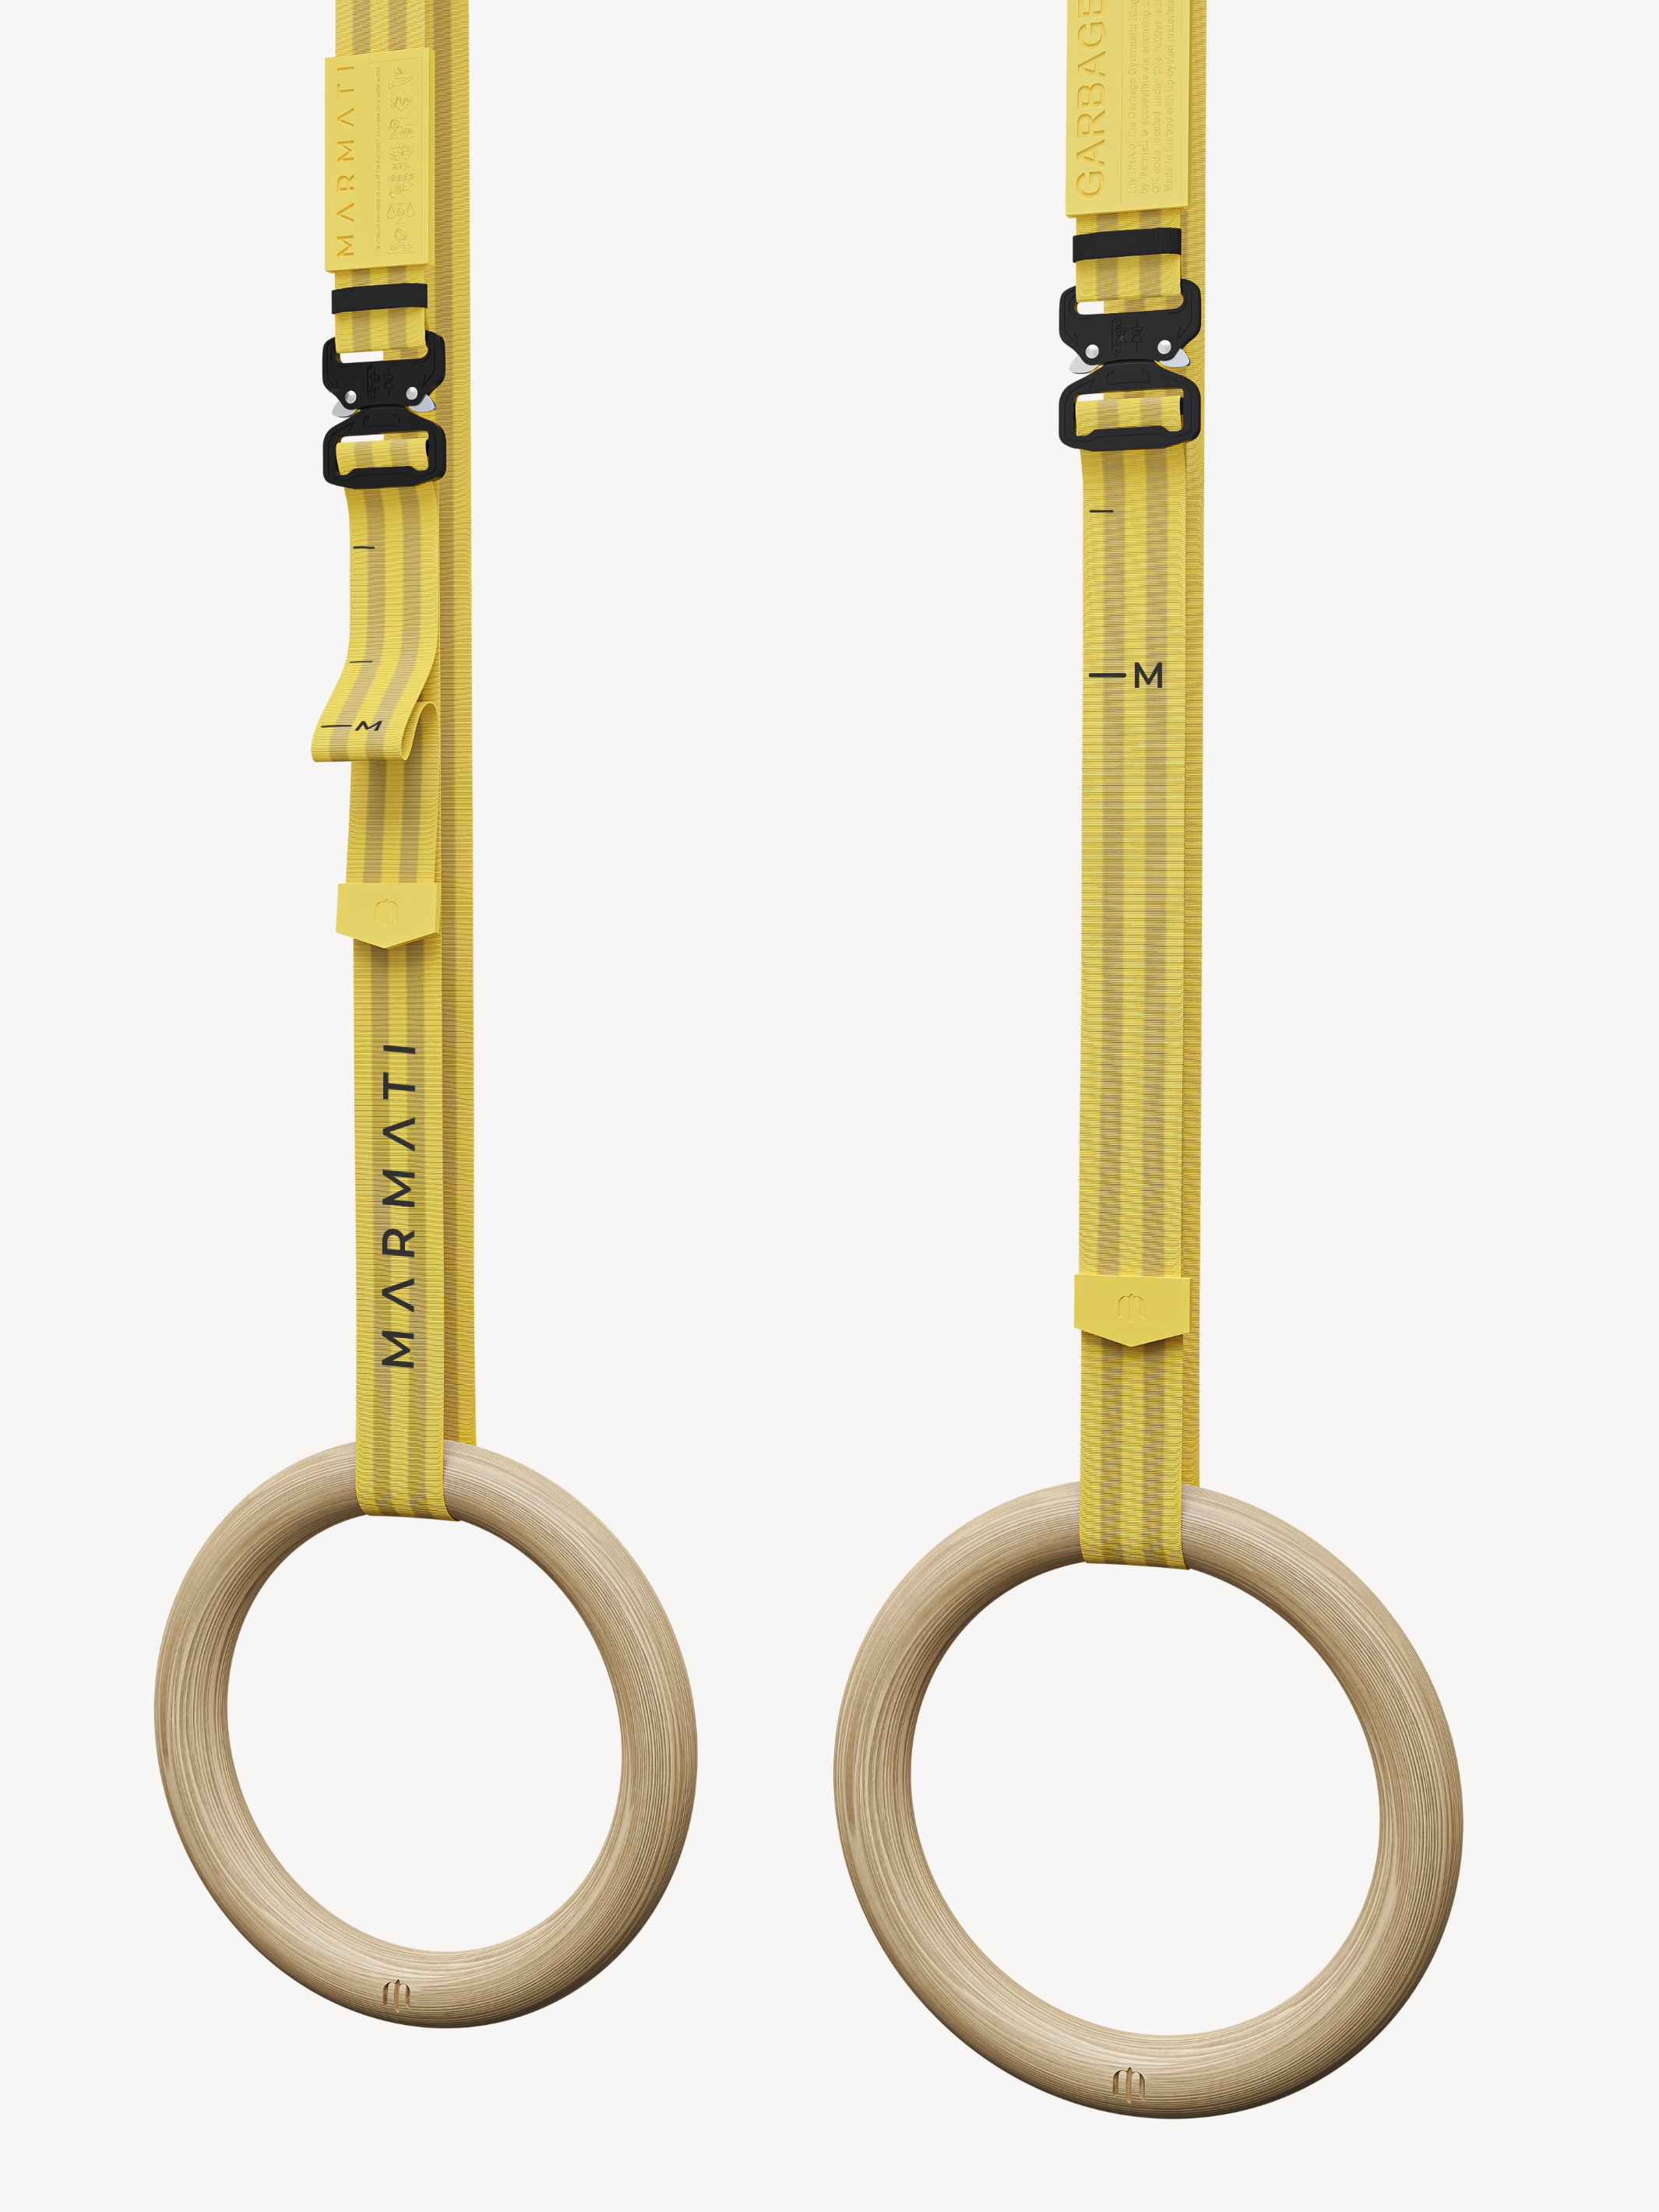 GARBAGE GYMNASTIC RINGS in YELLOW - This is the perfect choice for adventurers looking to take their skills to the next level. GARBAGE GYMNASTIC RINGS provide a unique challenge, allowing one to test their athletic prowess in a dynamic and exciting manner. Create your own daring stunts with these sophisticated sports equipment and take your workout beyond the limits.